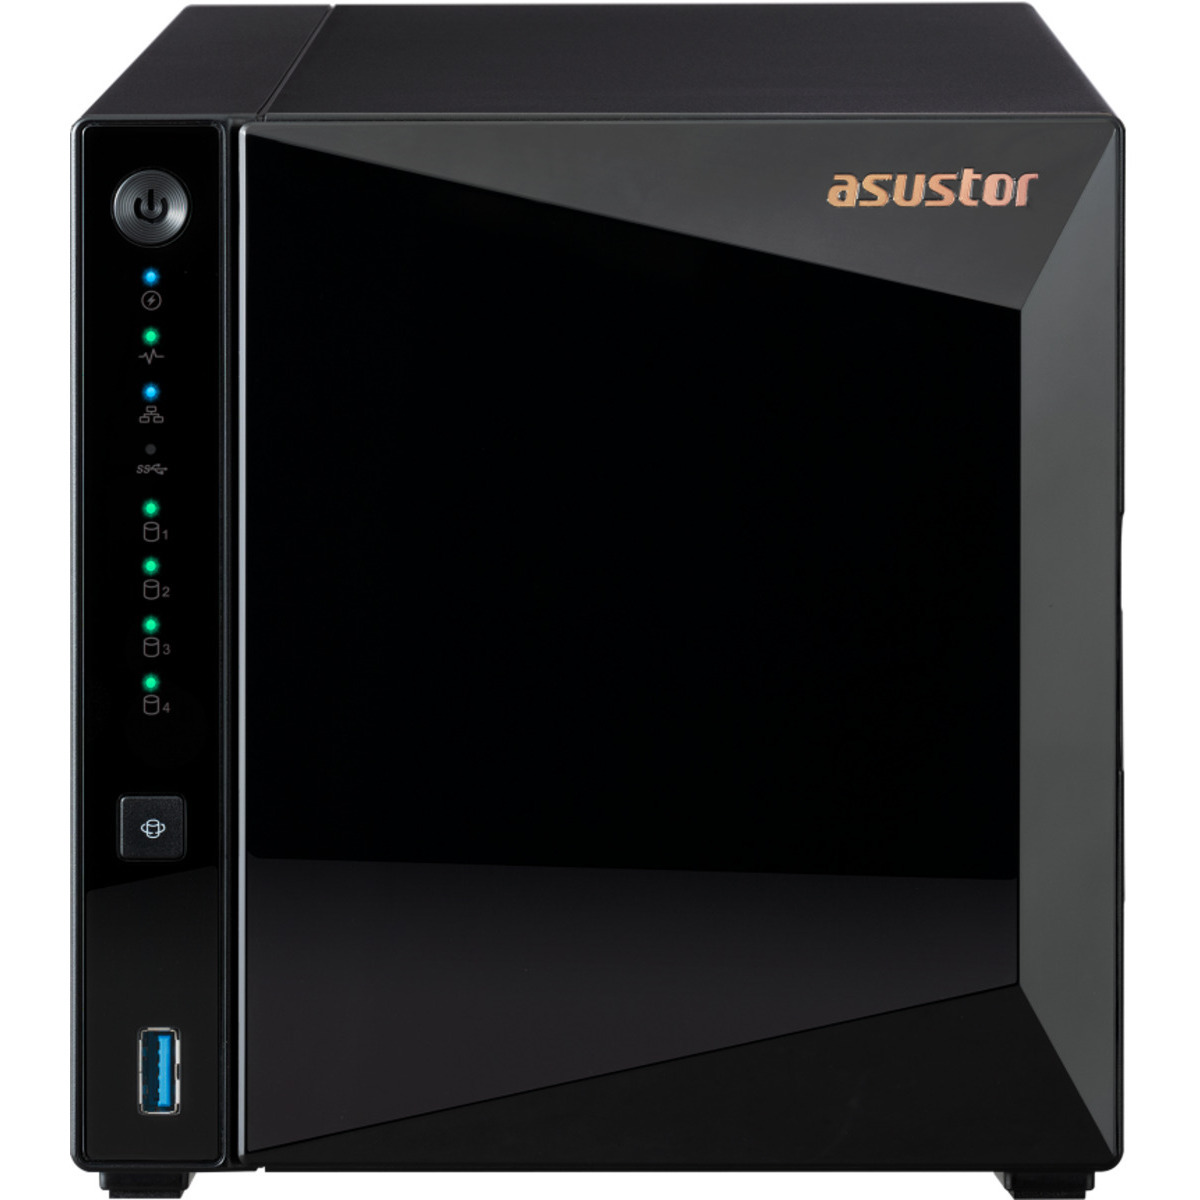 ASUSTOR DRIVESTOR 4 Pro AS3304T Desktop 4-Bay Personal / Basic Home / Small Office NAS - Network Attached Storage Device Burn-In Tested Configurations DRIVESTOR 4 Pro AS3304T